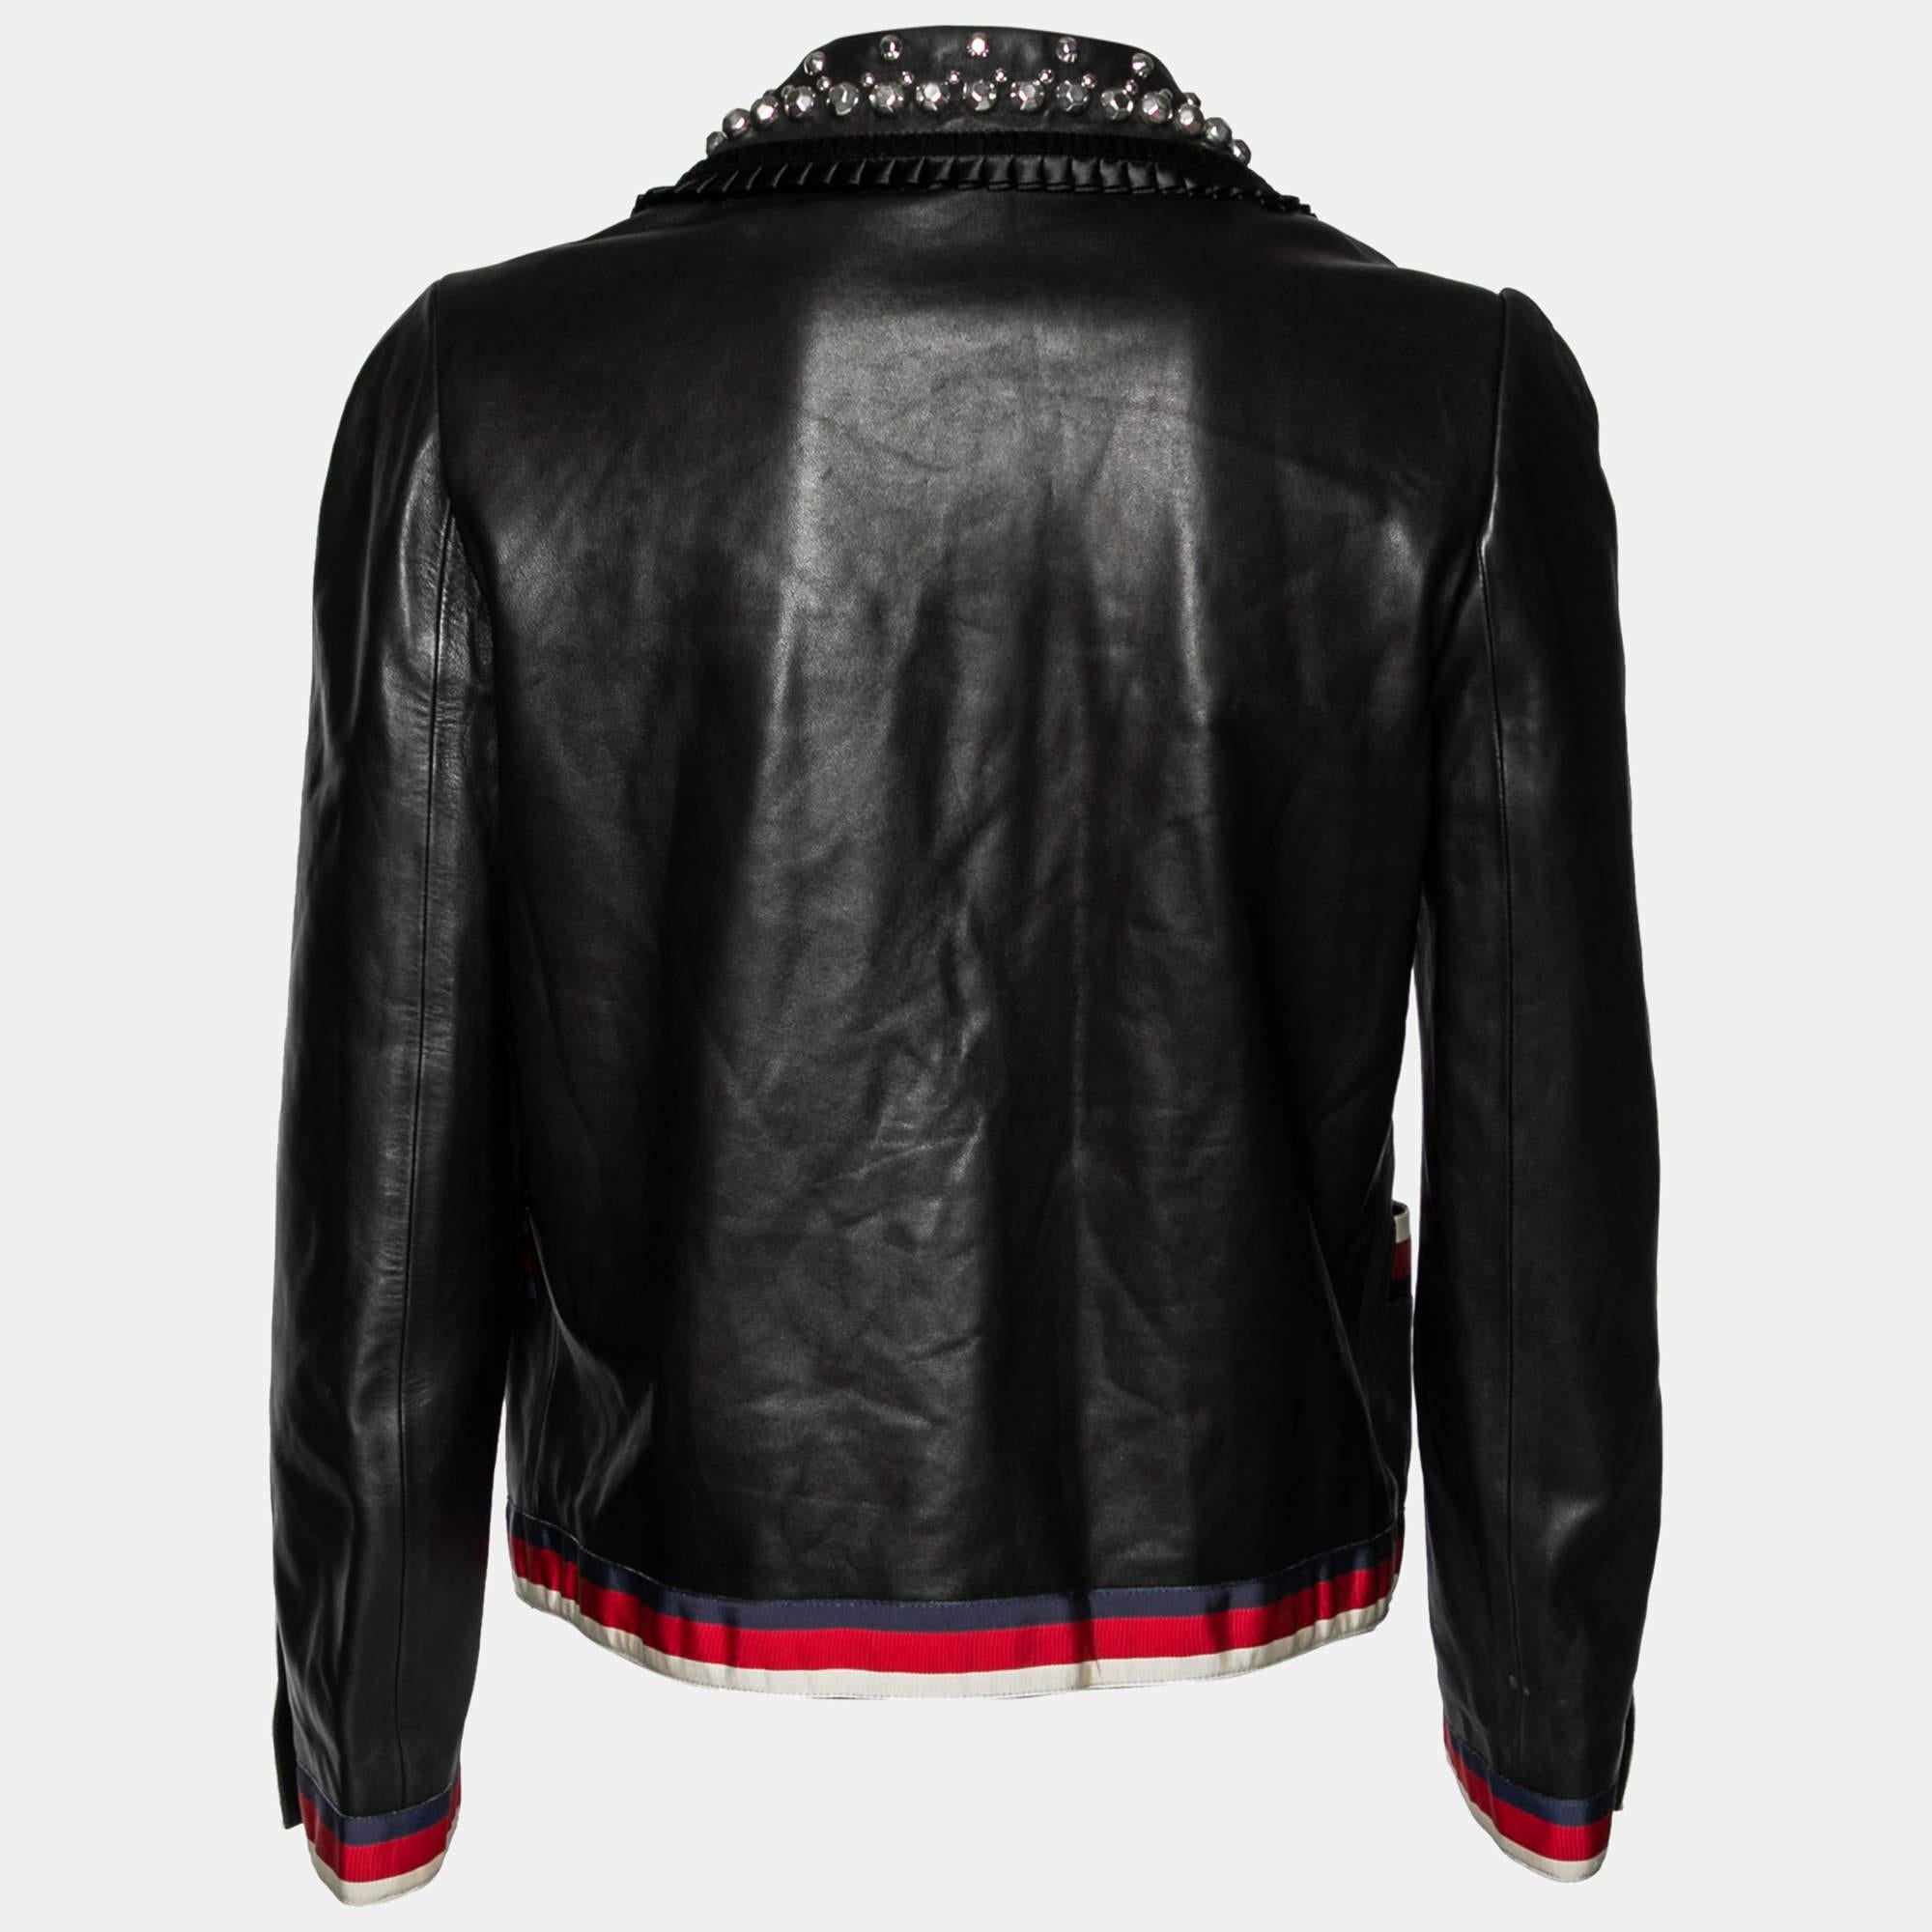 Gucci's statement choice of signature elements and classy design makes each of their creation worth owning. This jacket is truly a stunning piece! It is fashioned in black leather and accented with Web stripe trims. It has a studded collar, a bow